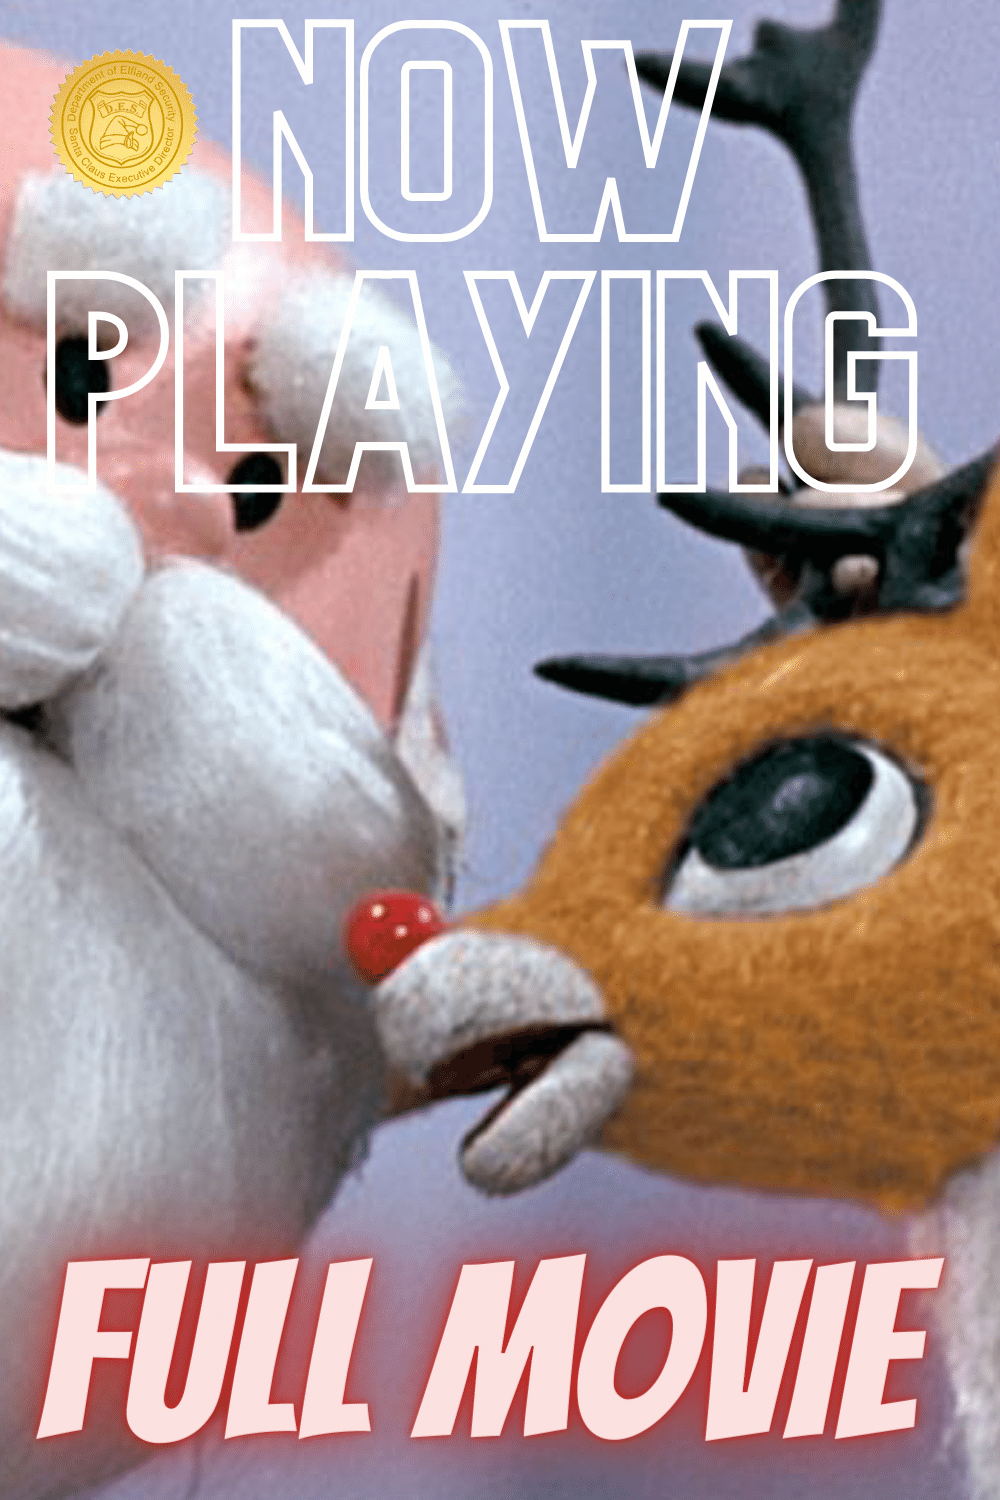 Rudolph the Red Nosed Reindeer (Stop Motion film from 1964)